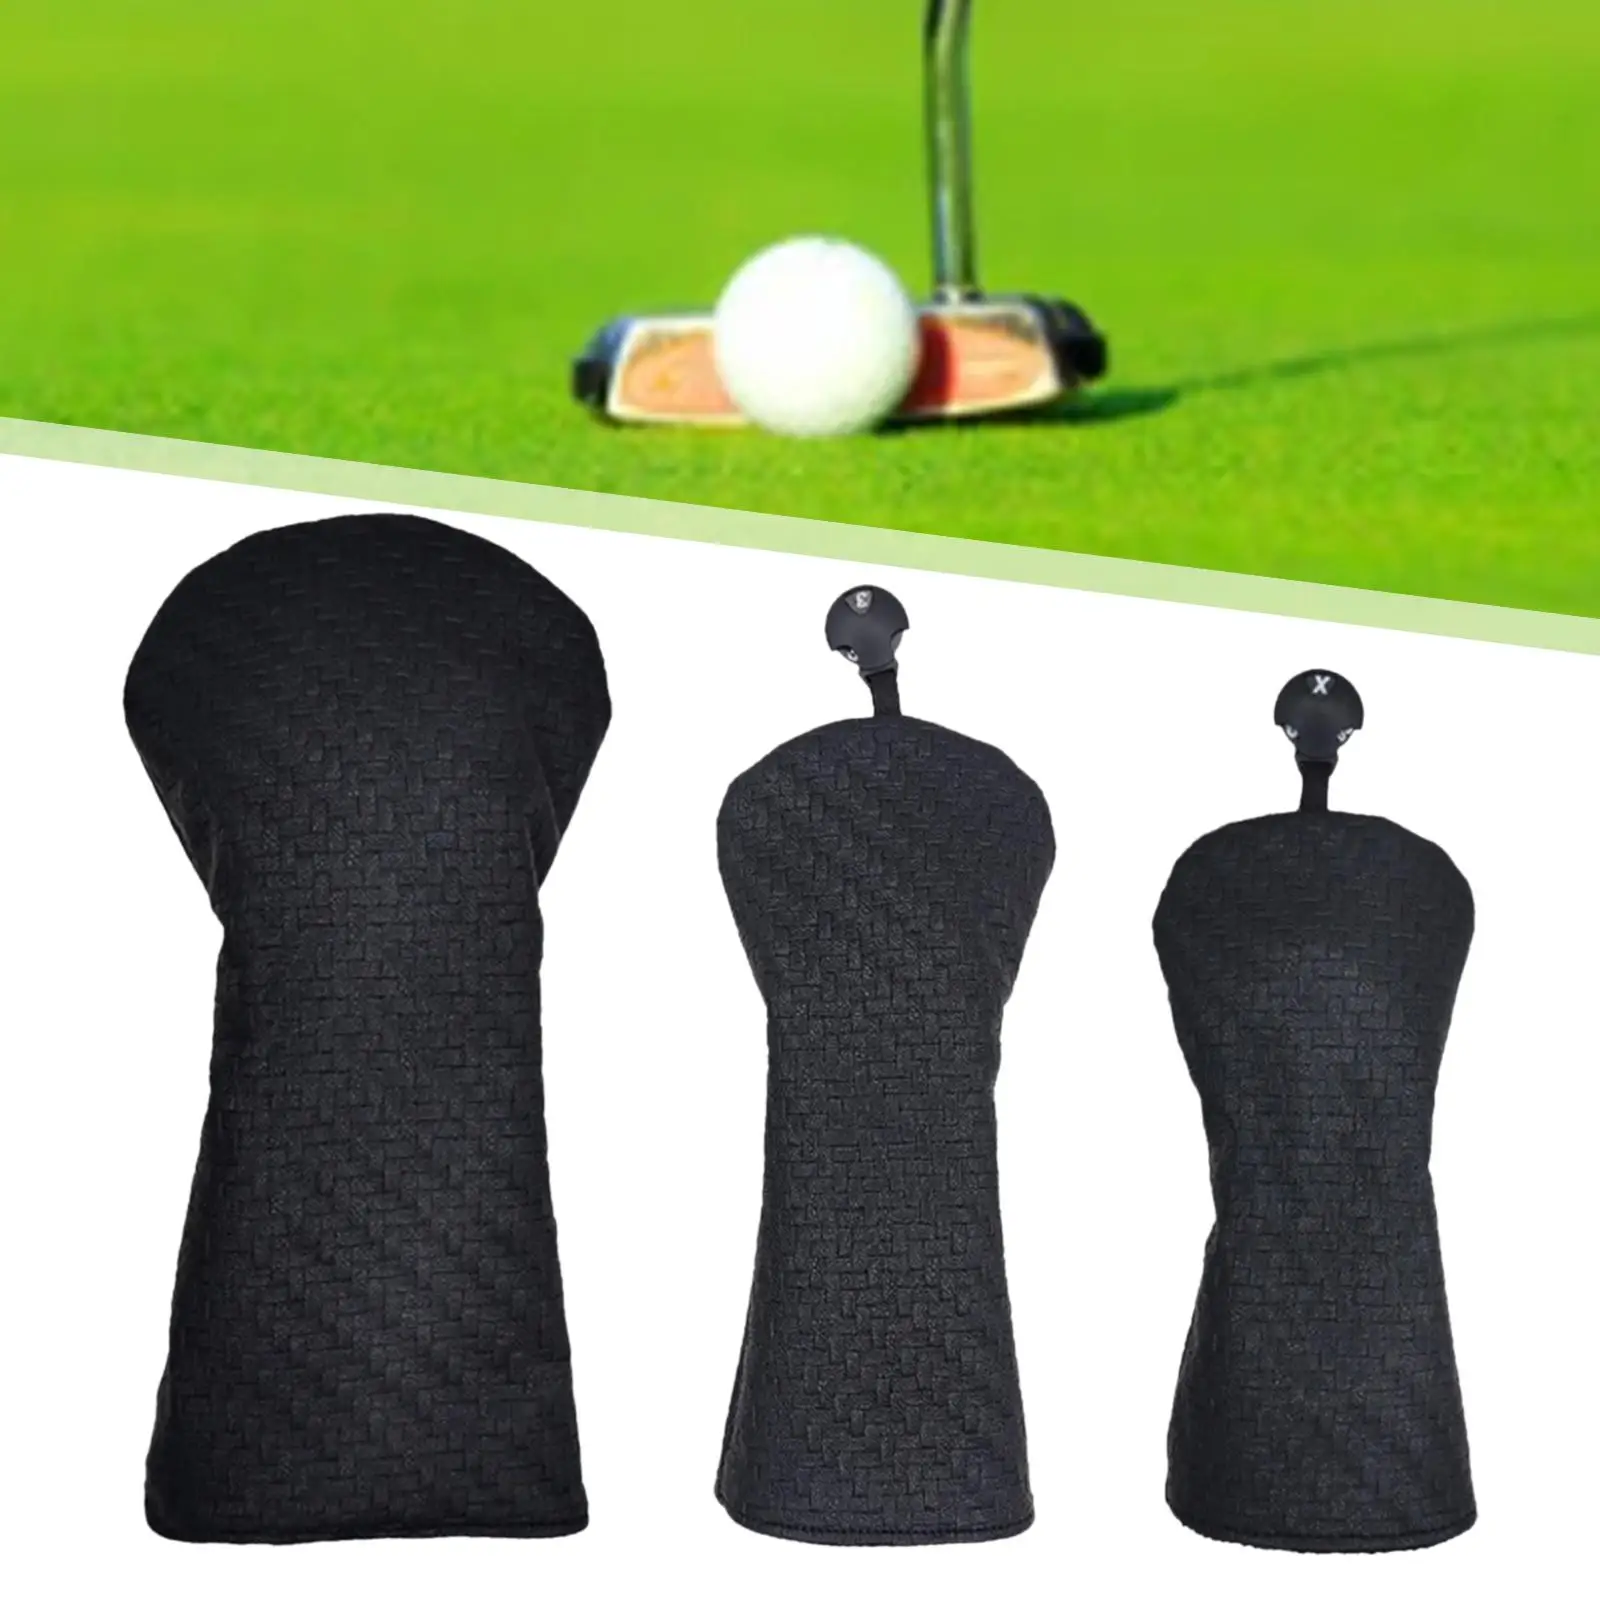 Golf Pole Headcover Equipment Protector Wedges Wrapped for Golf Training